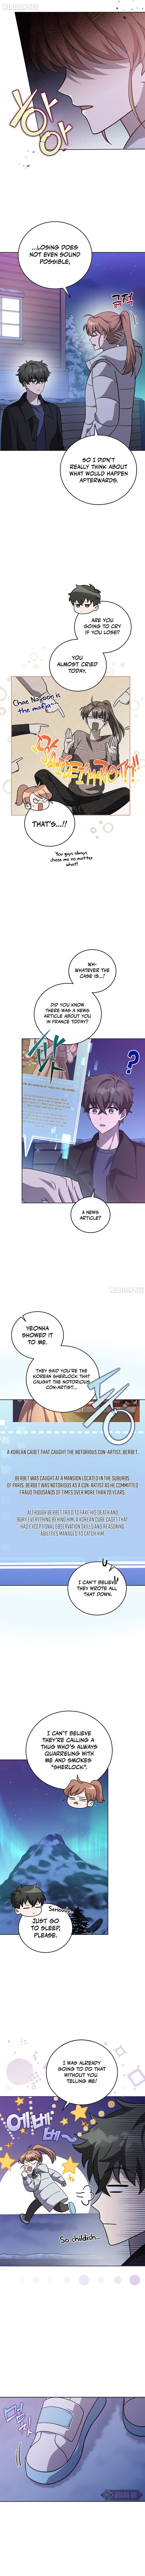 the-novels-extra-remake-chap-47-6